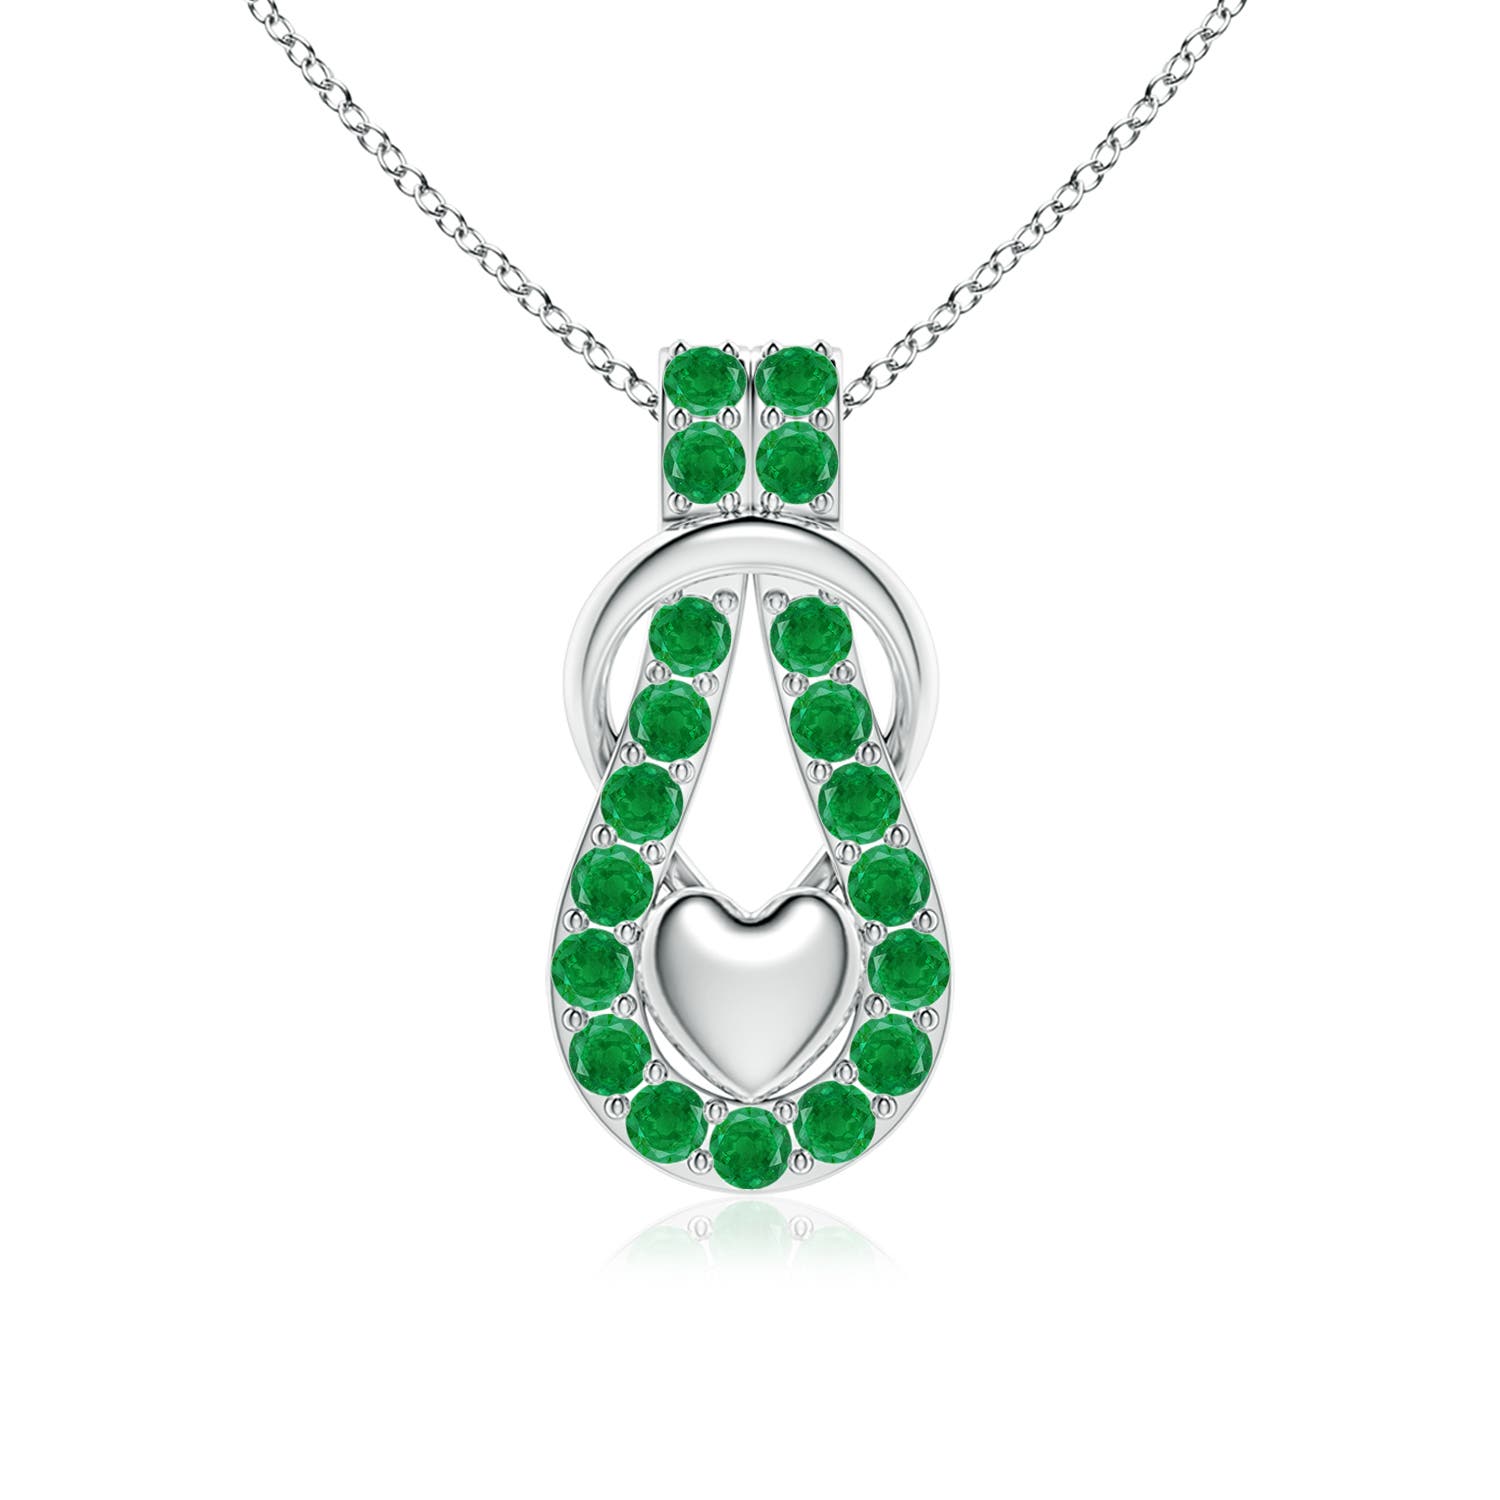 AA - Emerald / 1.2 CT / 14 KT White Gold